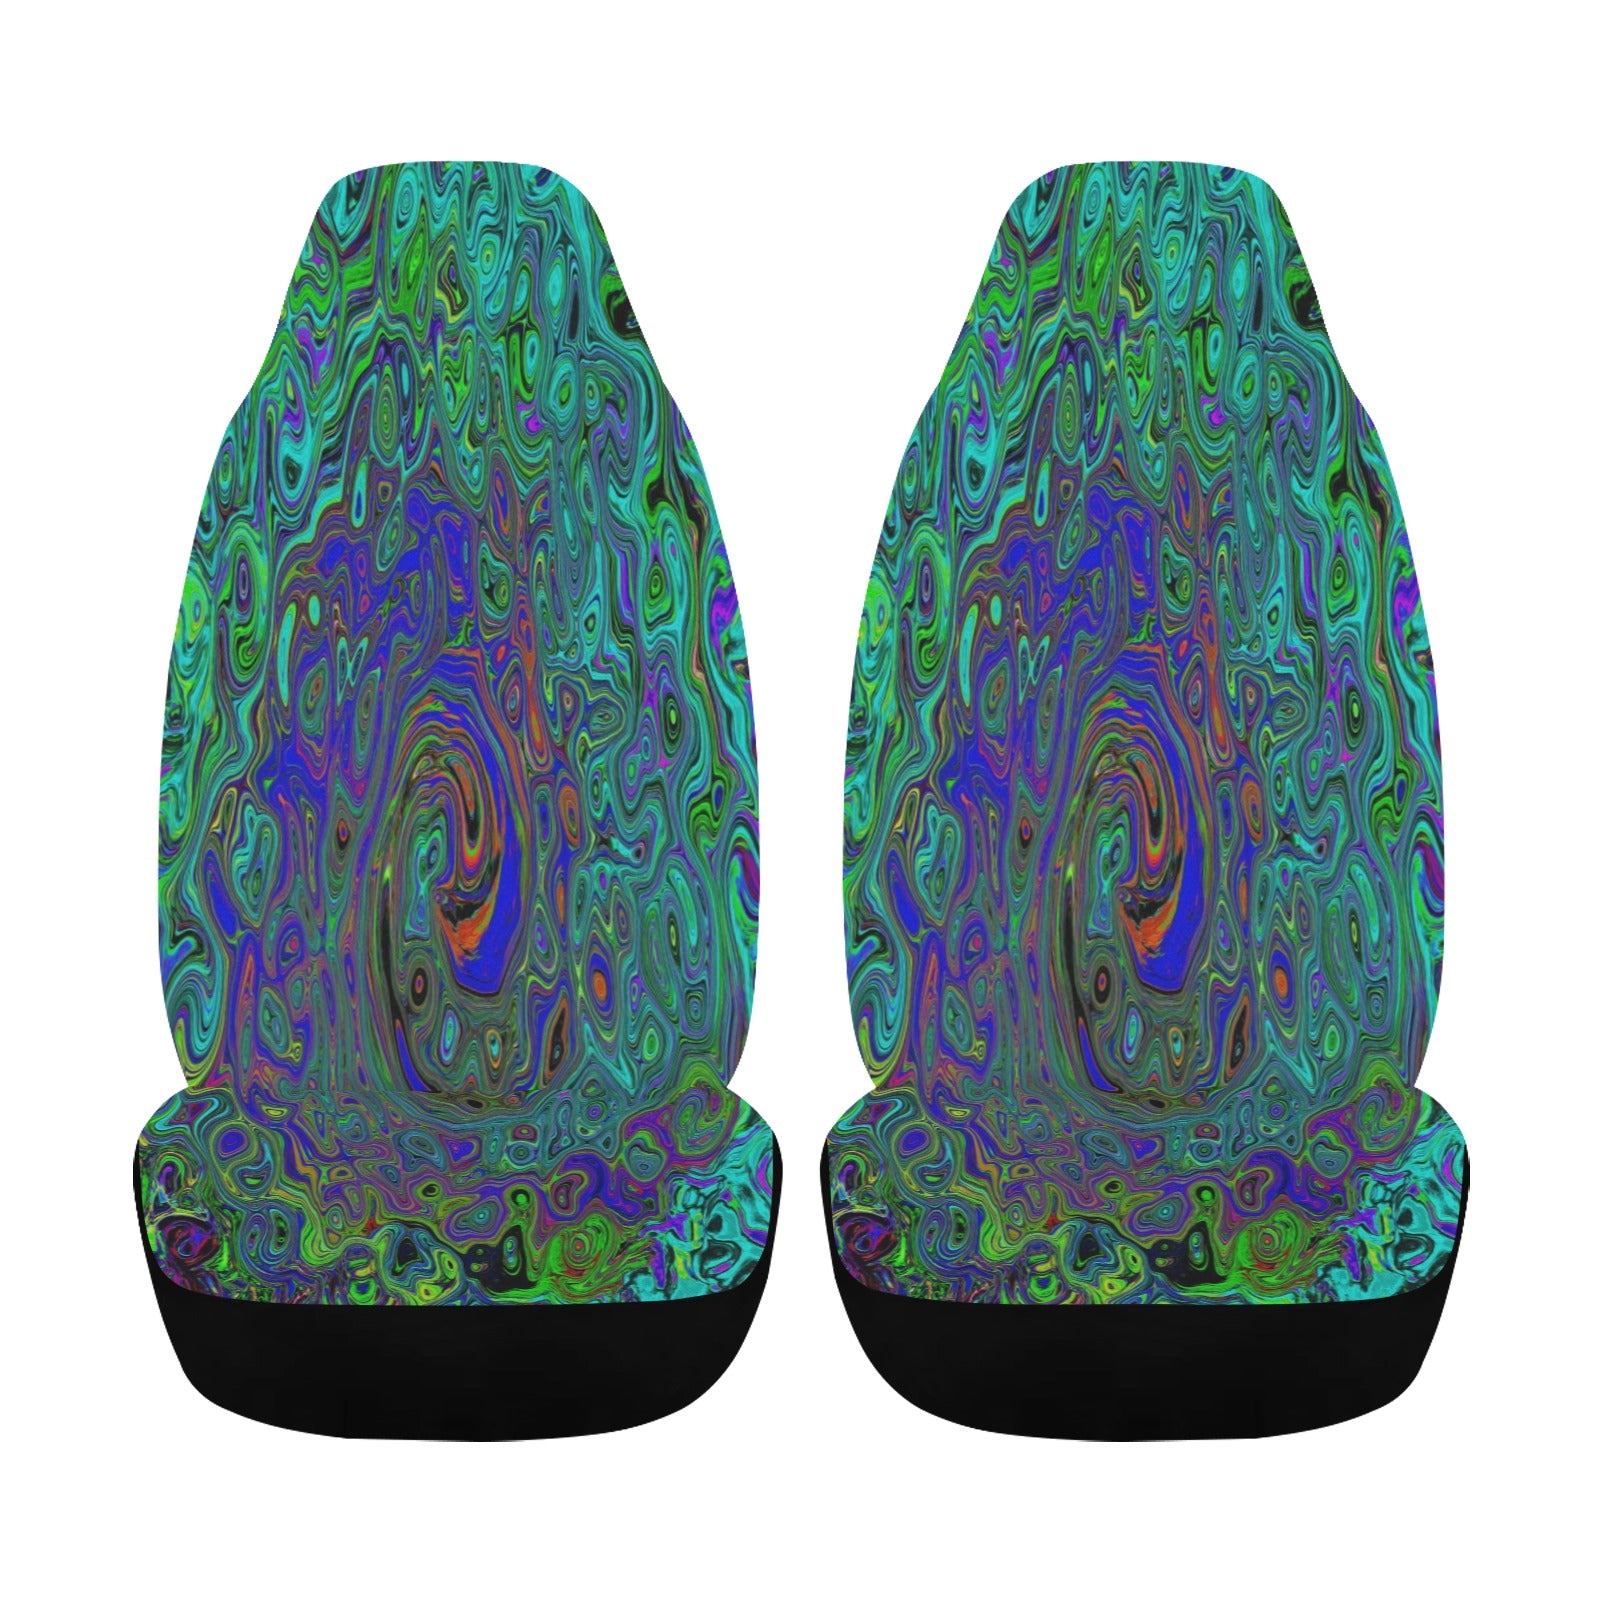 Car Seat Covers, Marbled Blue and Aquamarine Abstract Retro Swirl